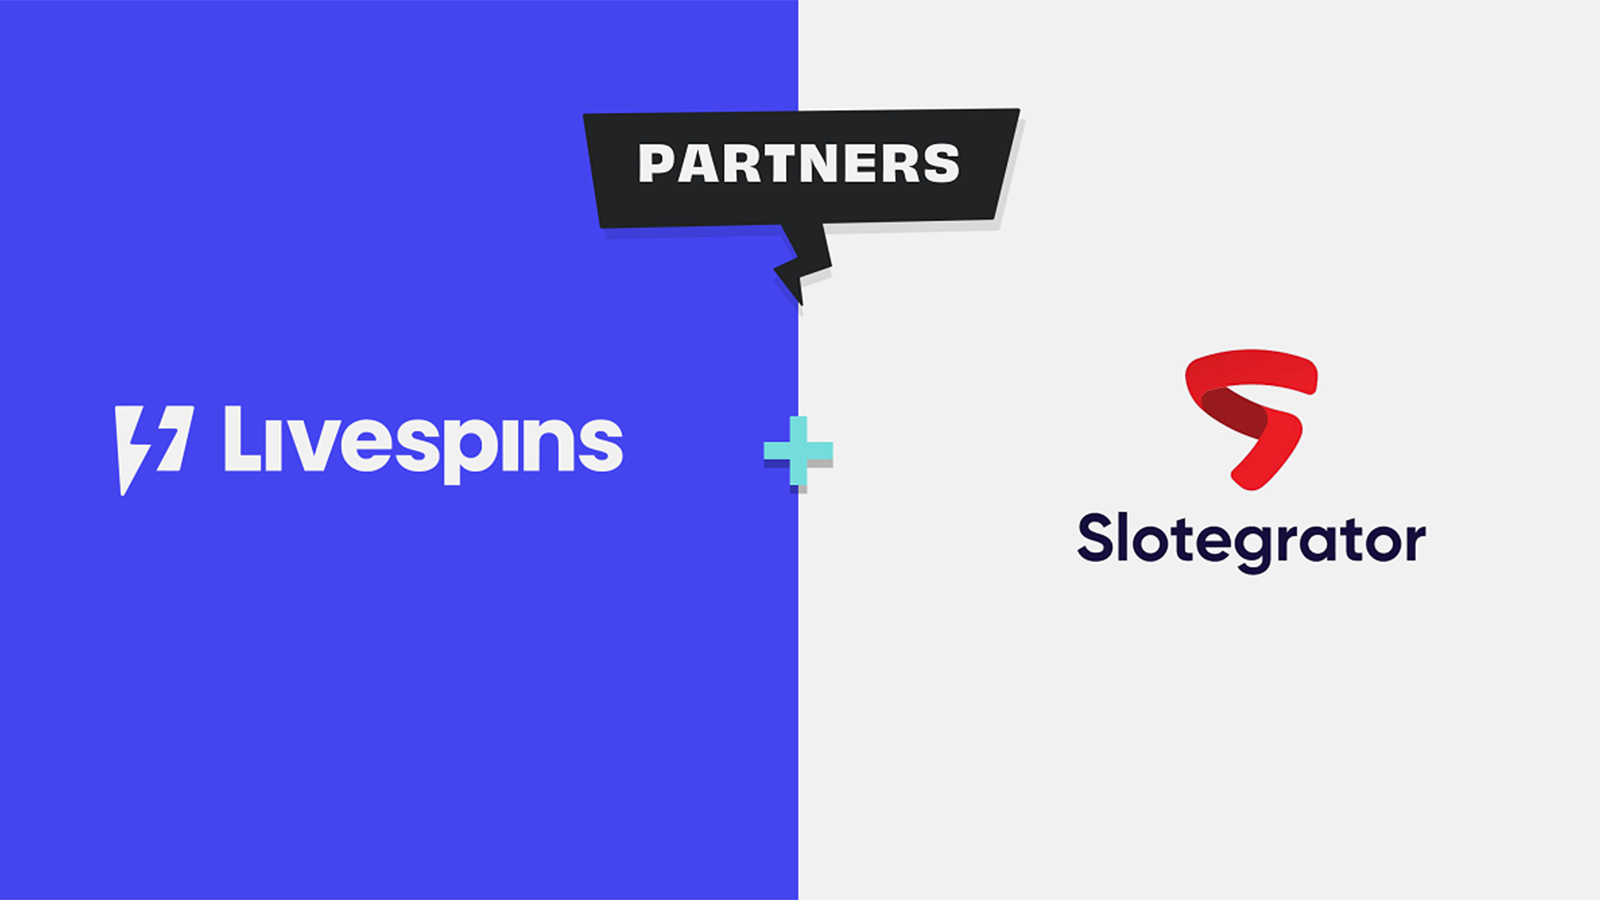 Slotegrator Teams Up with Livespins